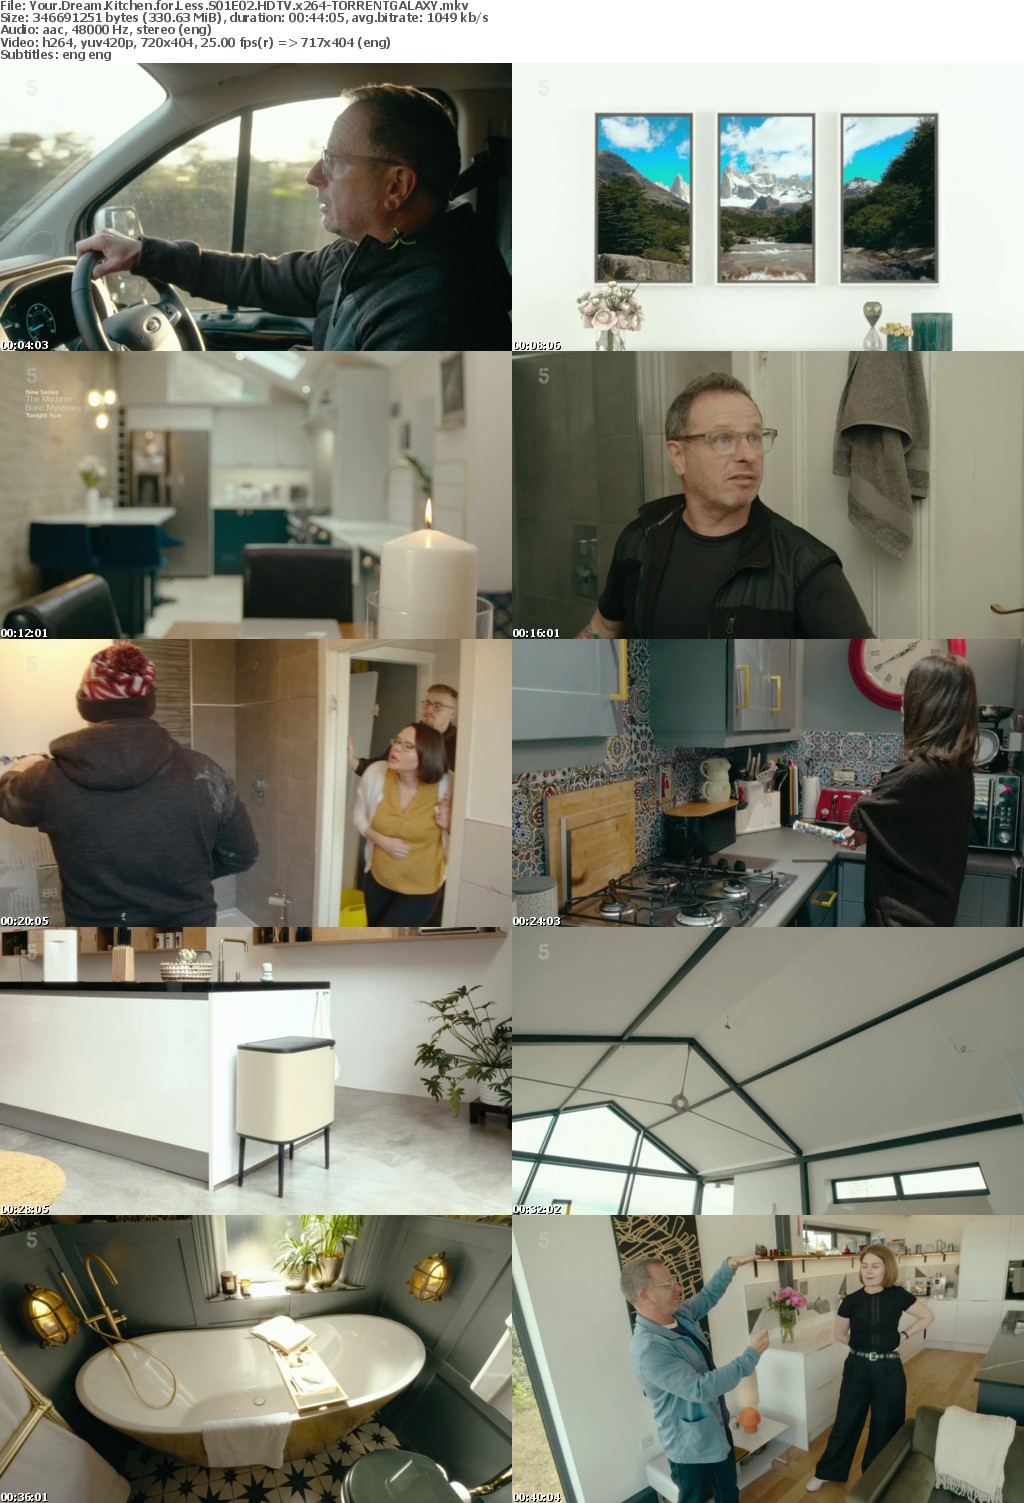 Your Dream Kitchen for Less S01E02 HDTV x264-GALAXY